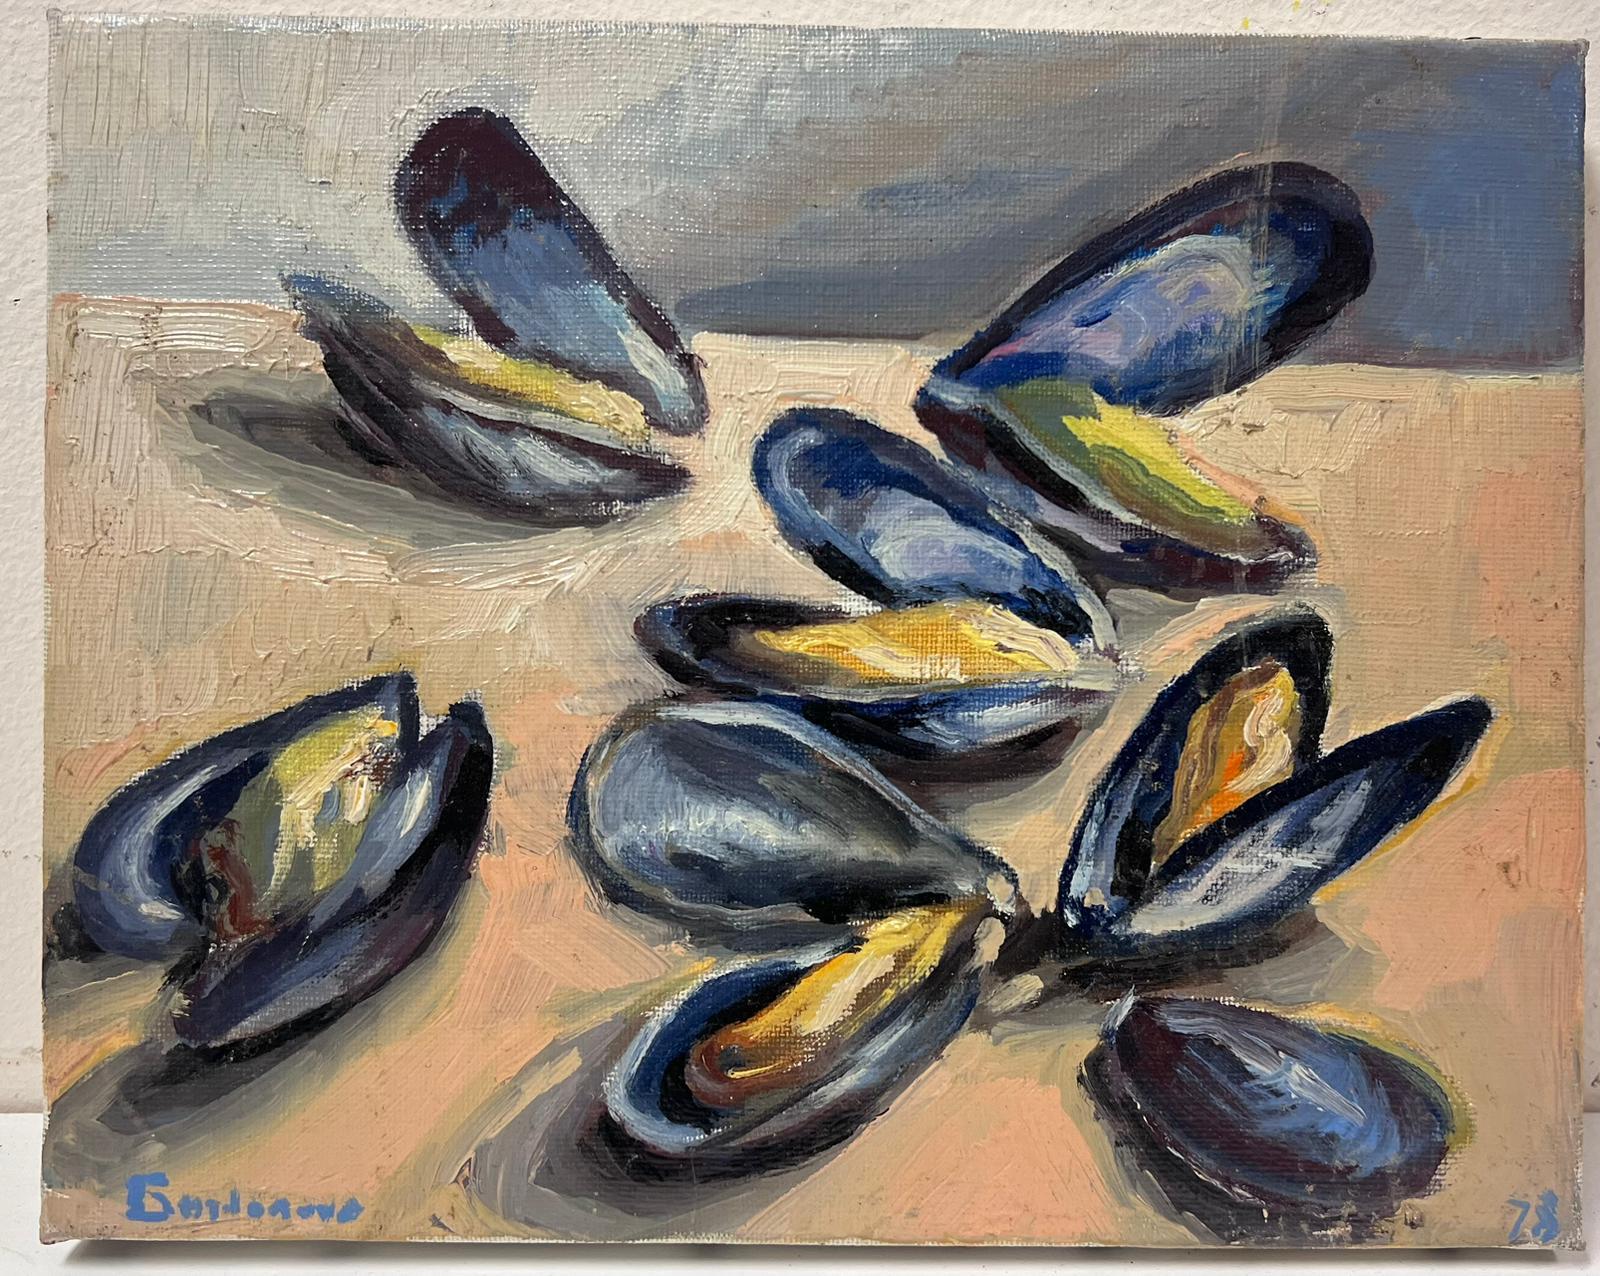 Mussels
by Georges Bordonave (French contemporary) 
signed oil painting on canvas, unframed
canvas: 7.5 x 9.5 inches
condition: very good
provenance: from a large private collection of this artists work, western Paris, France. 